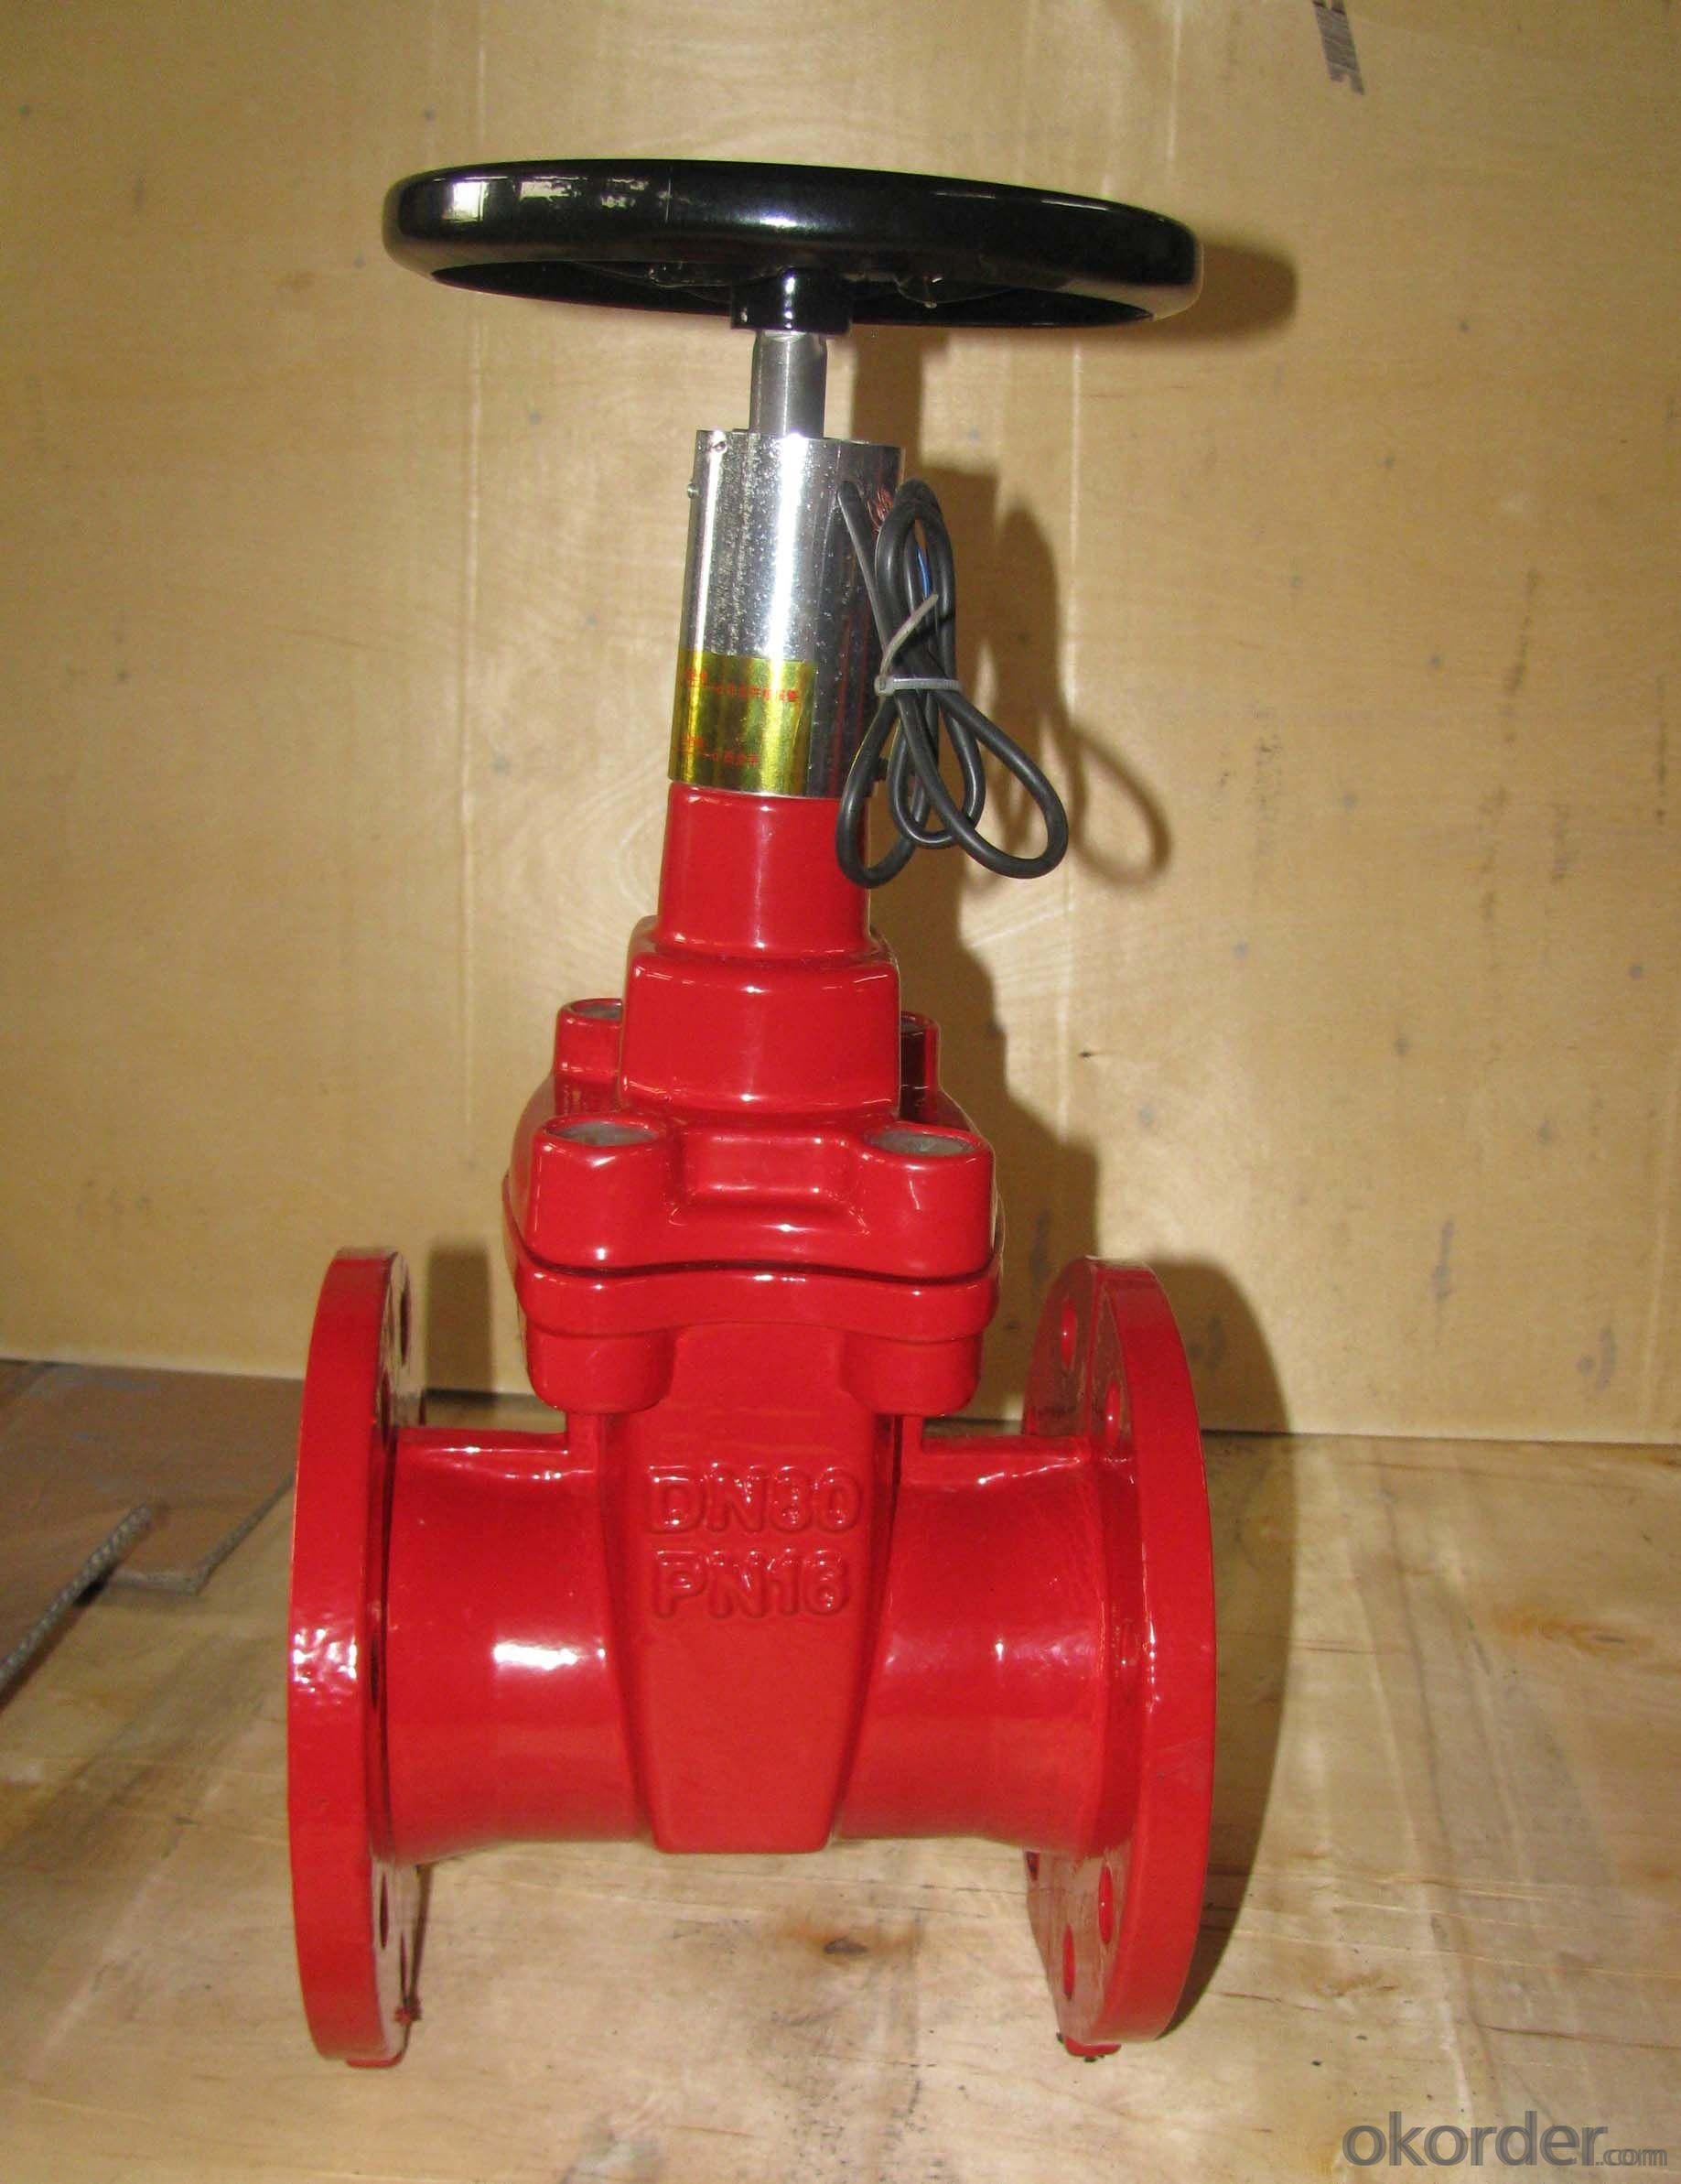 Gate Valve with Ductile Iron for Water System real-time quotes, last